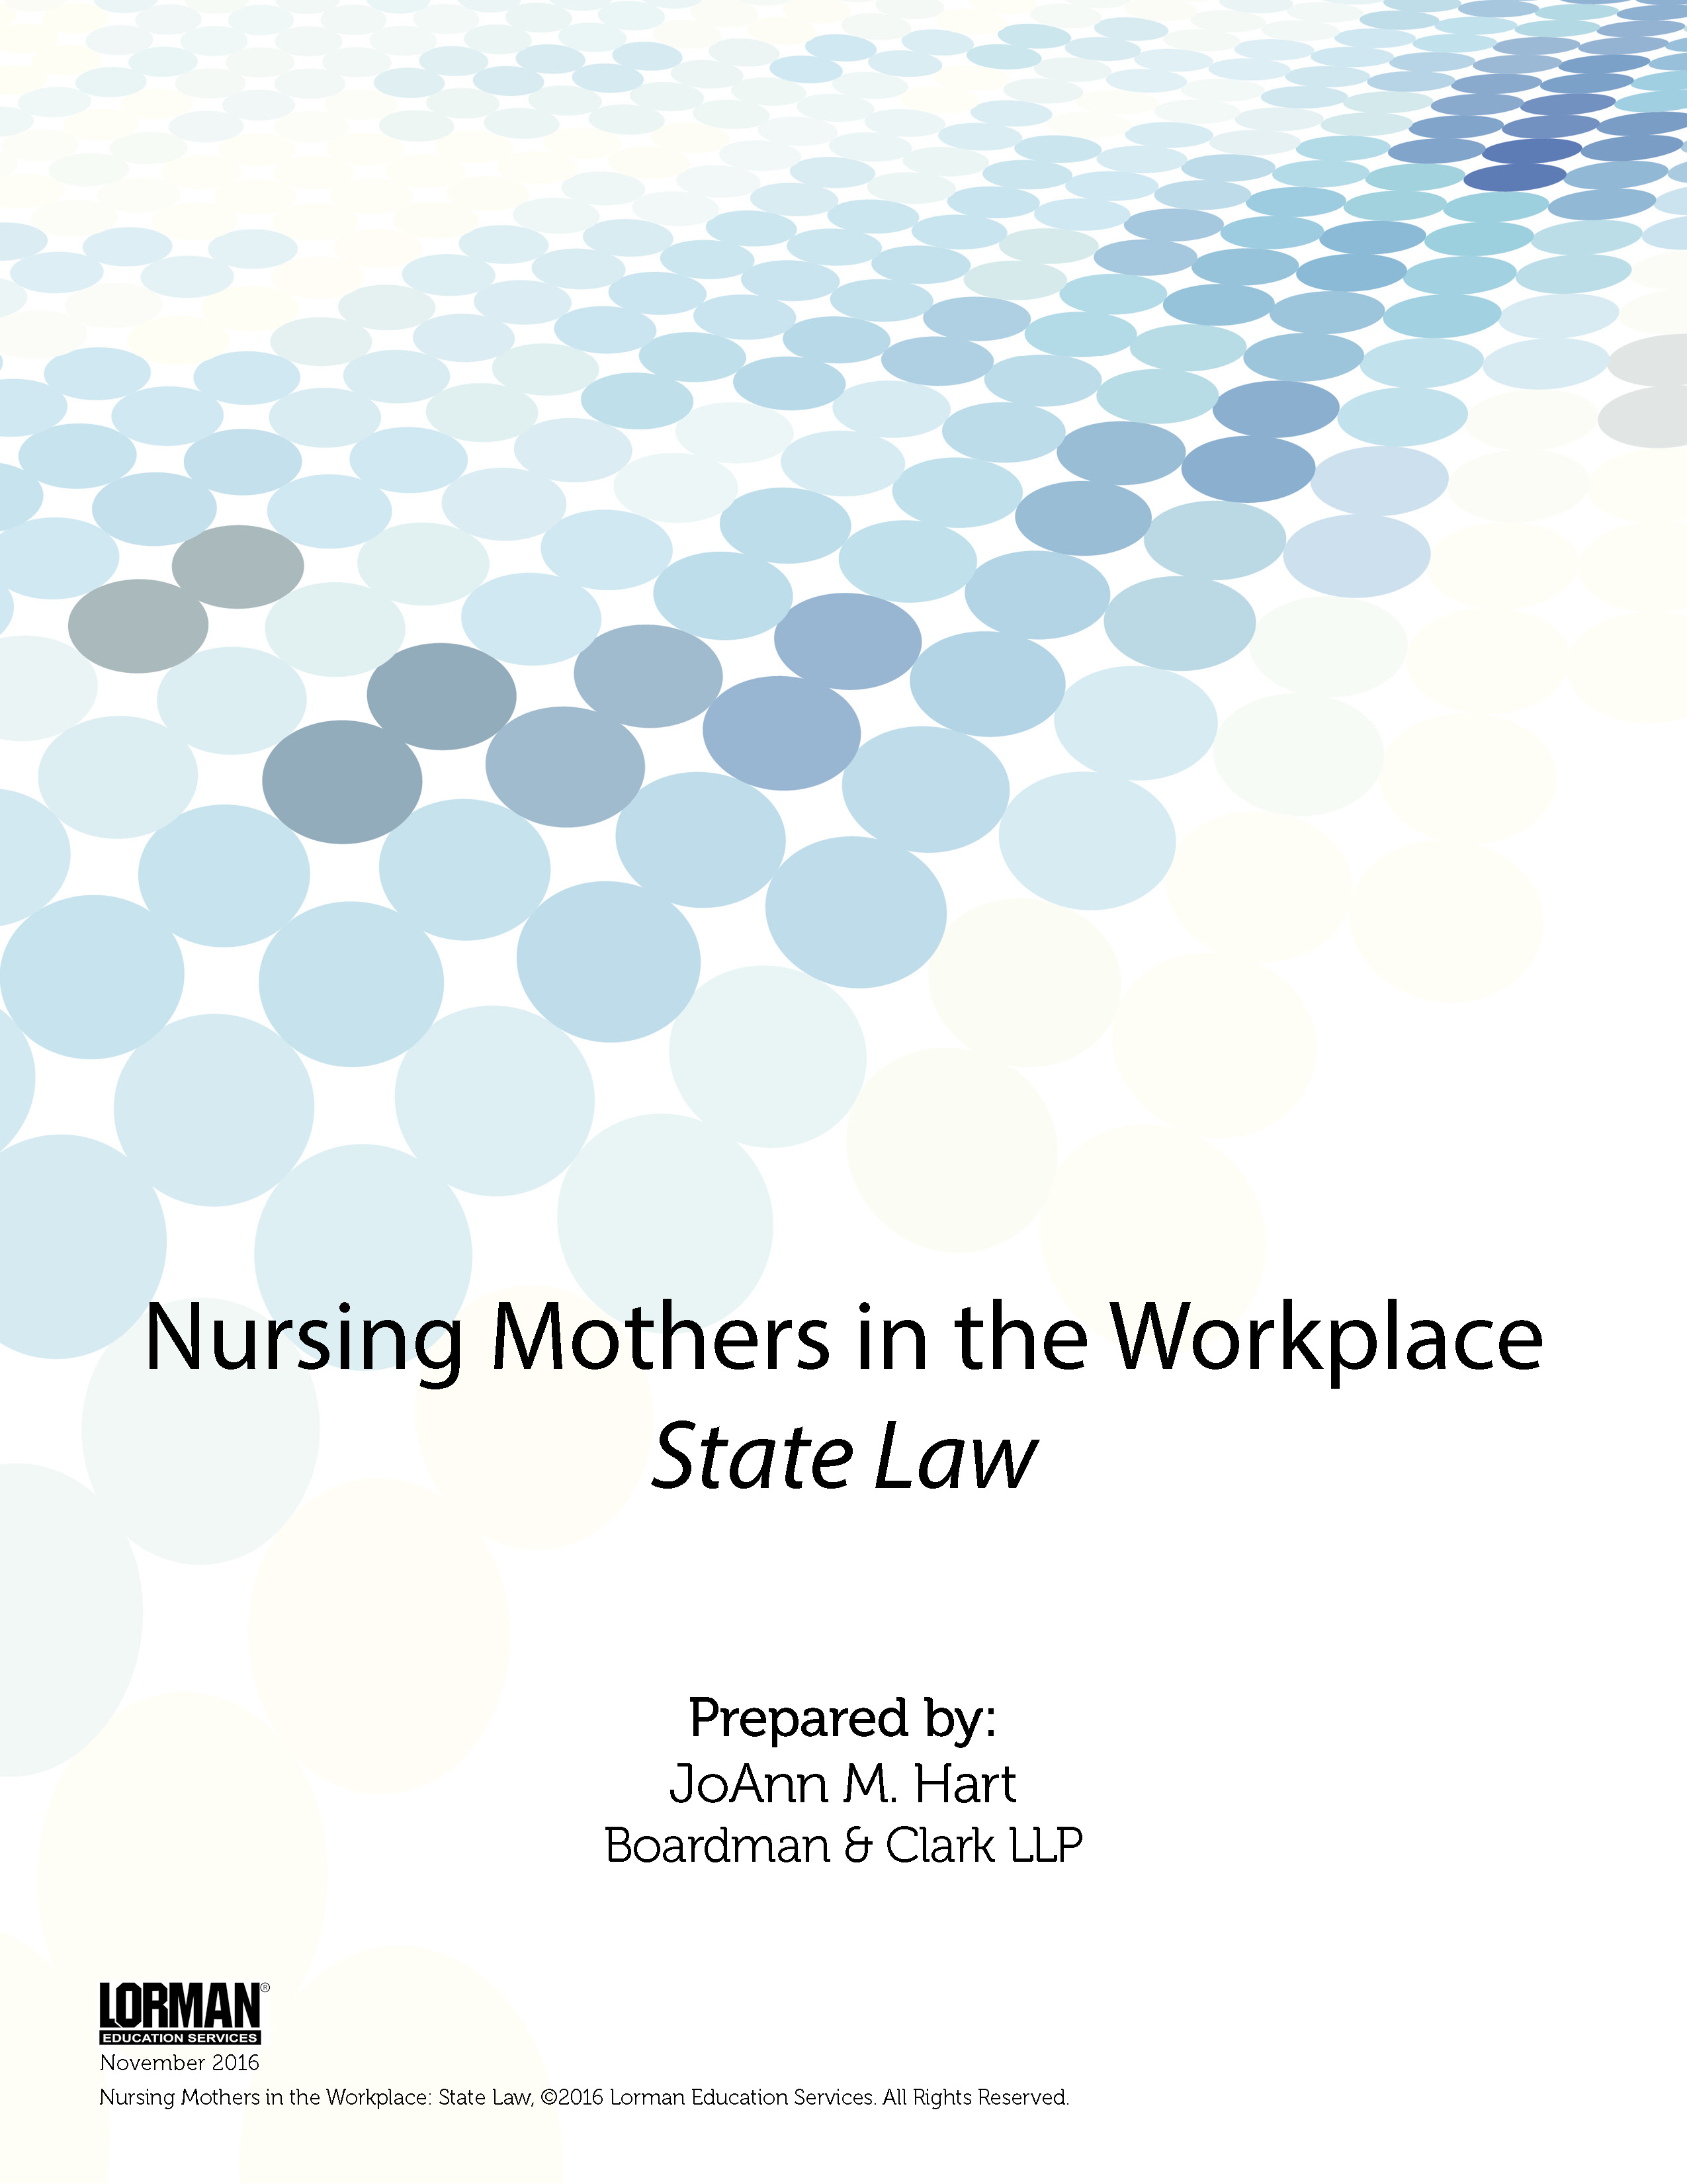 Nursing Mothers in the Workplace - State Law